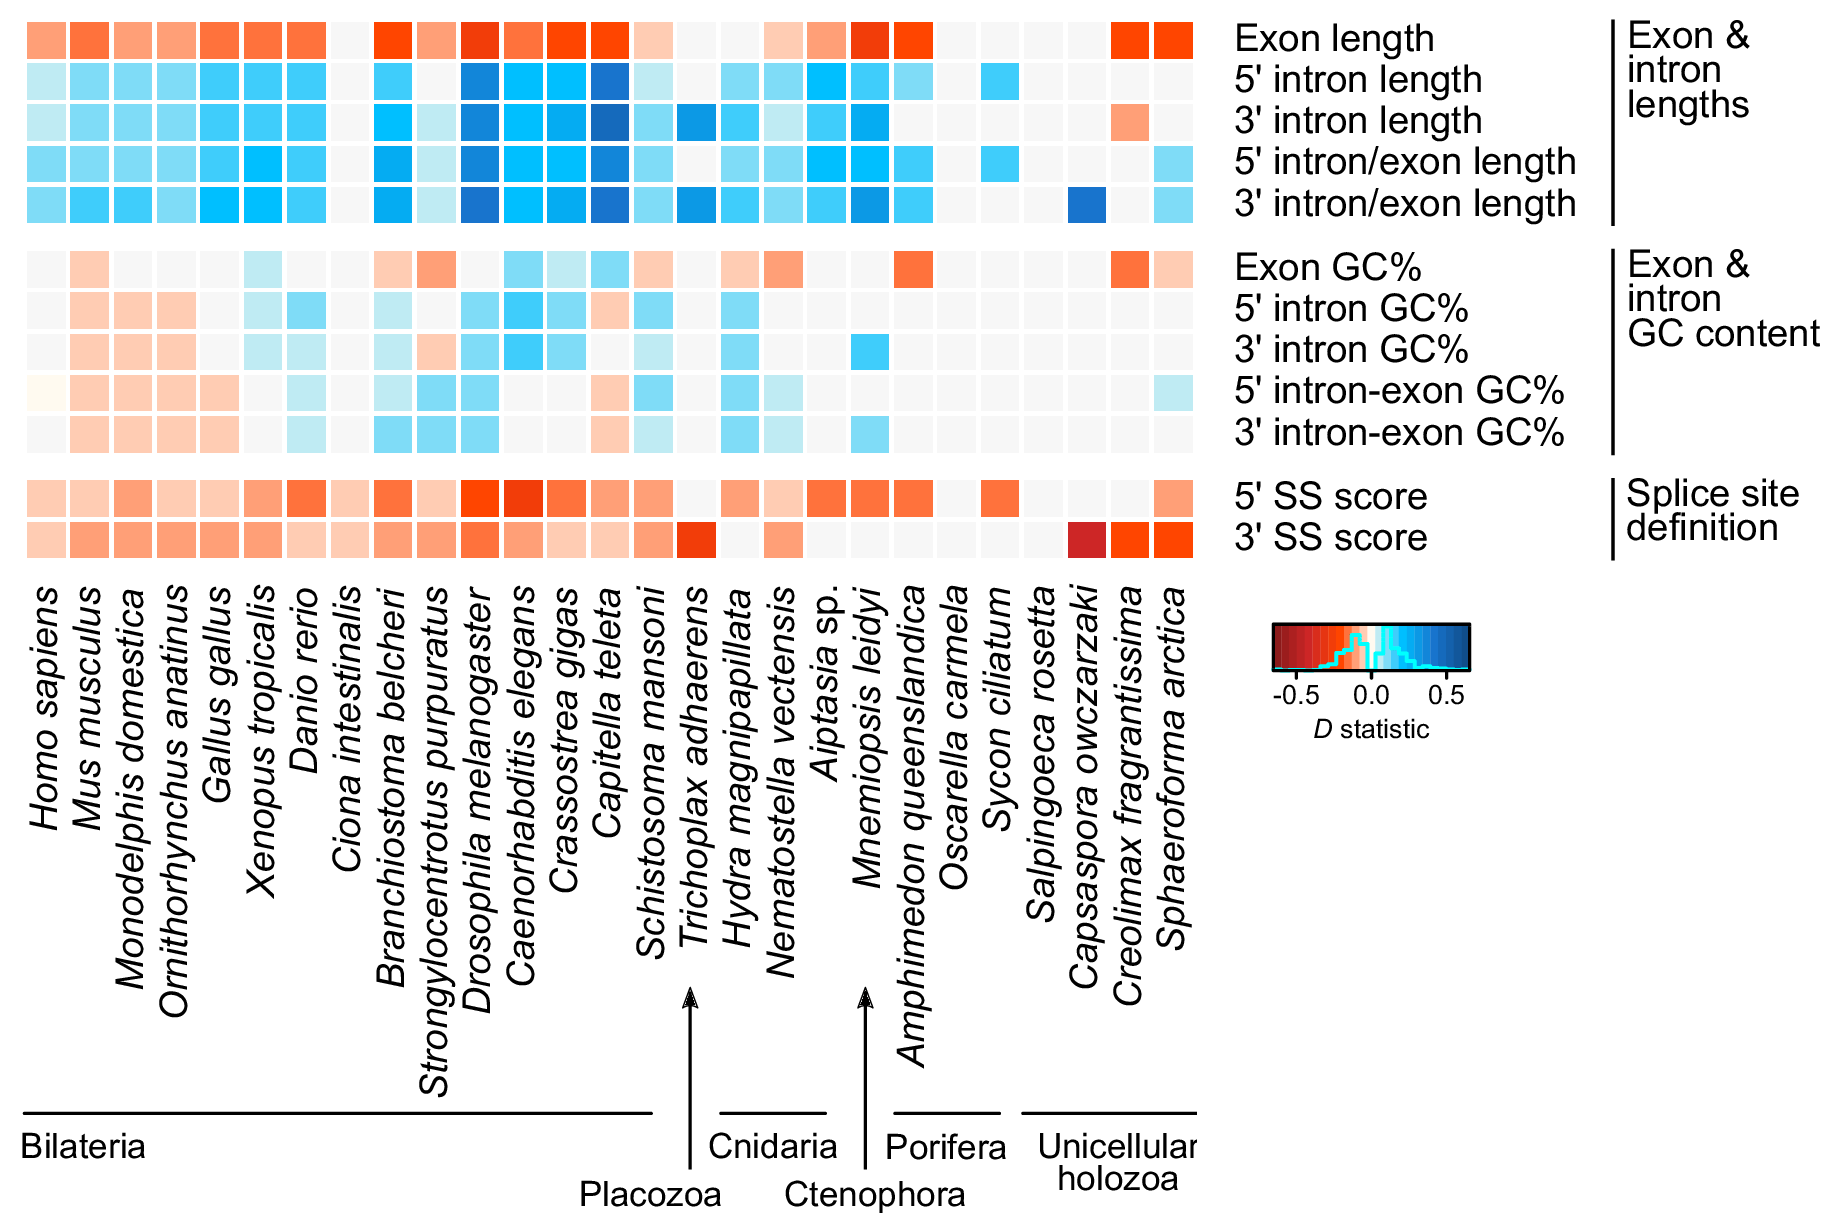 Positive (blue) and negative (red) associations of various gene architectural features with higher ES levels, for some holozoans. All 65 species are shown in the paper.